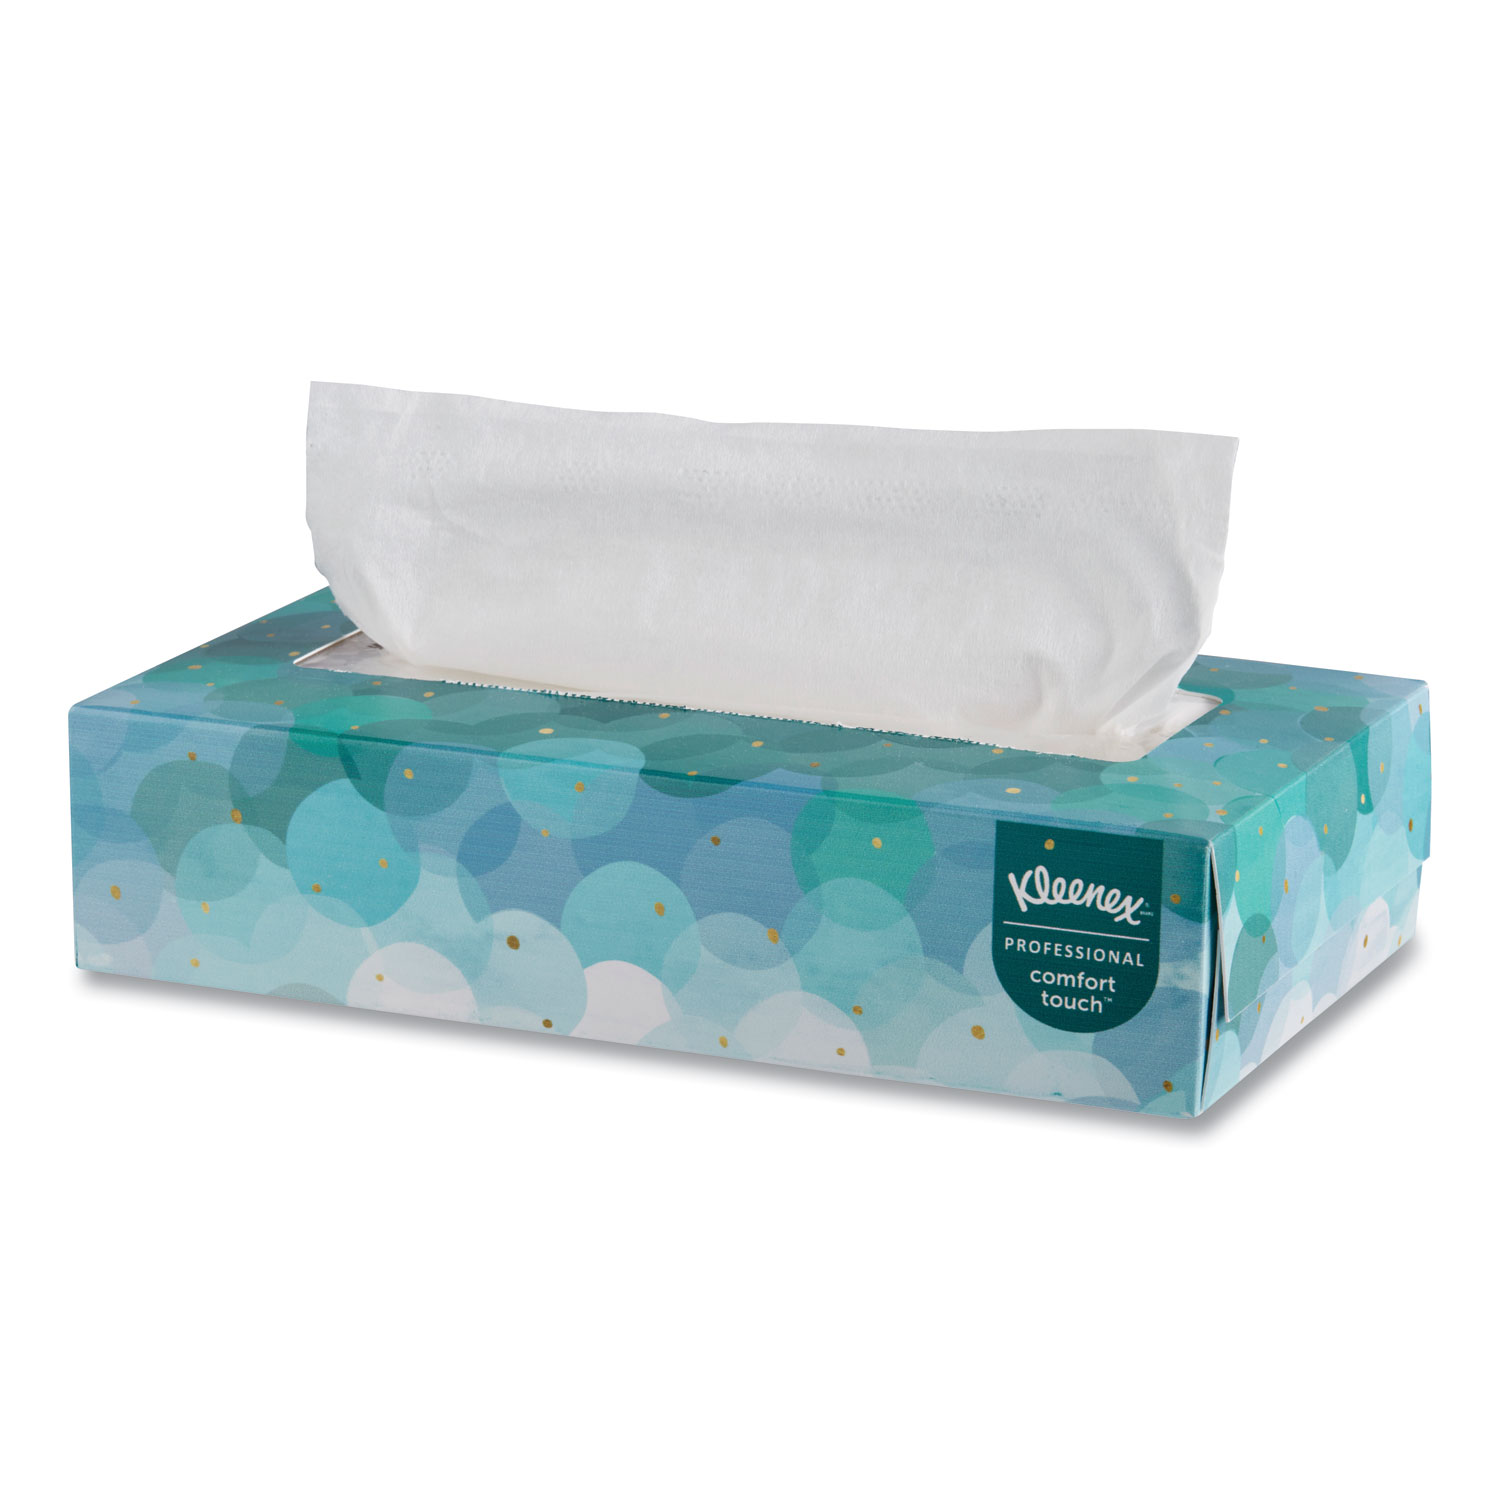 100 Tissues Per Box White Carton of 36 Boxes Kleenex FSC Certified Pop-Up Boxes 2-Ply Facial Tissue 